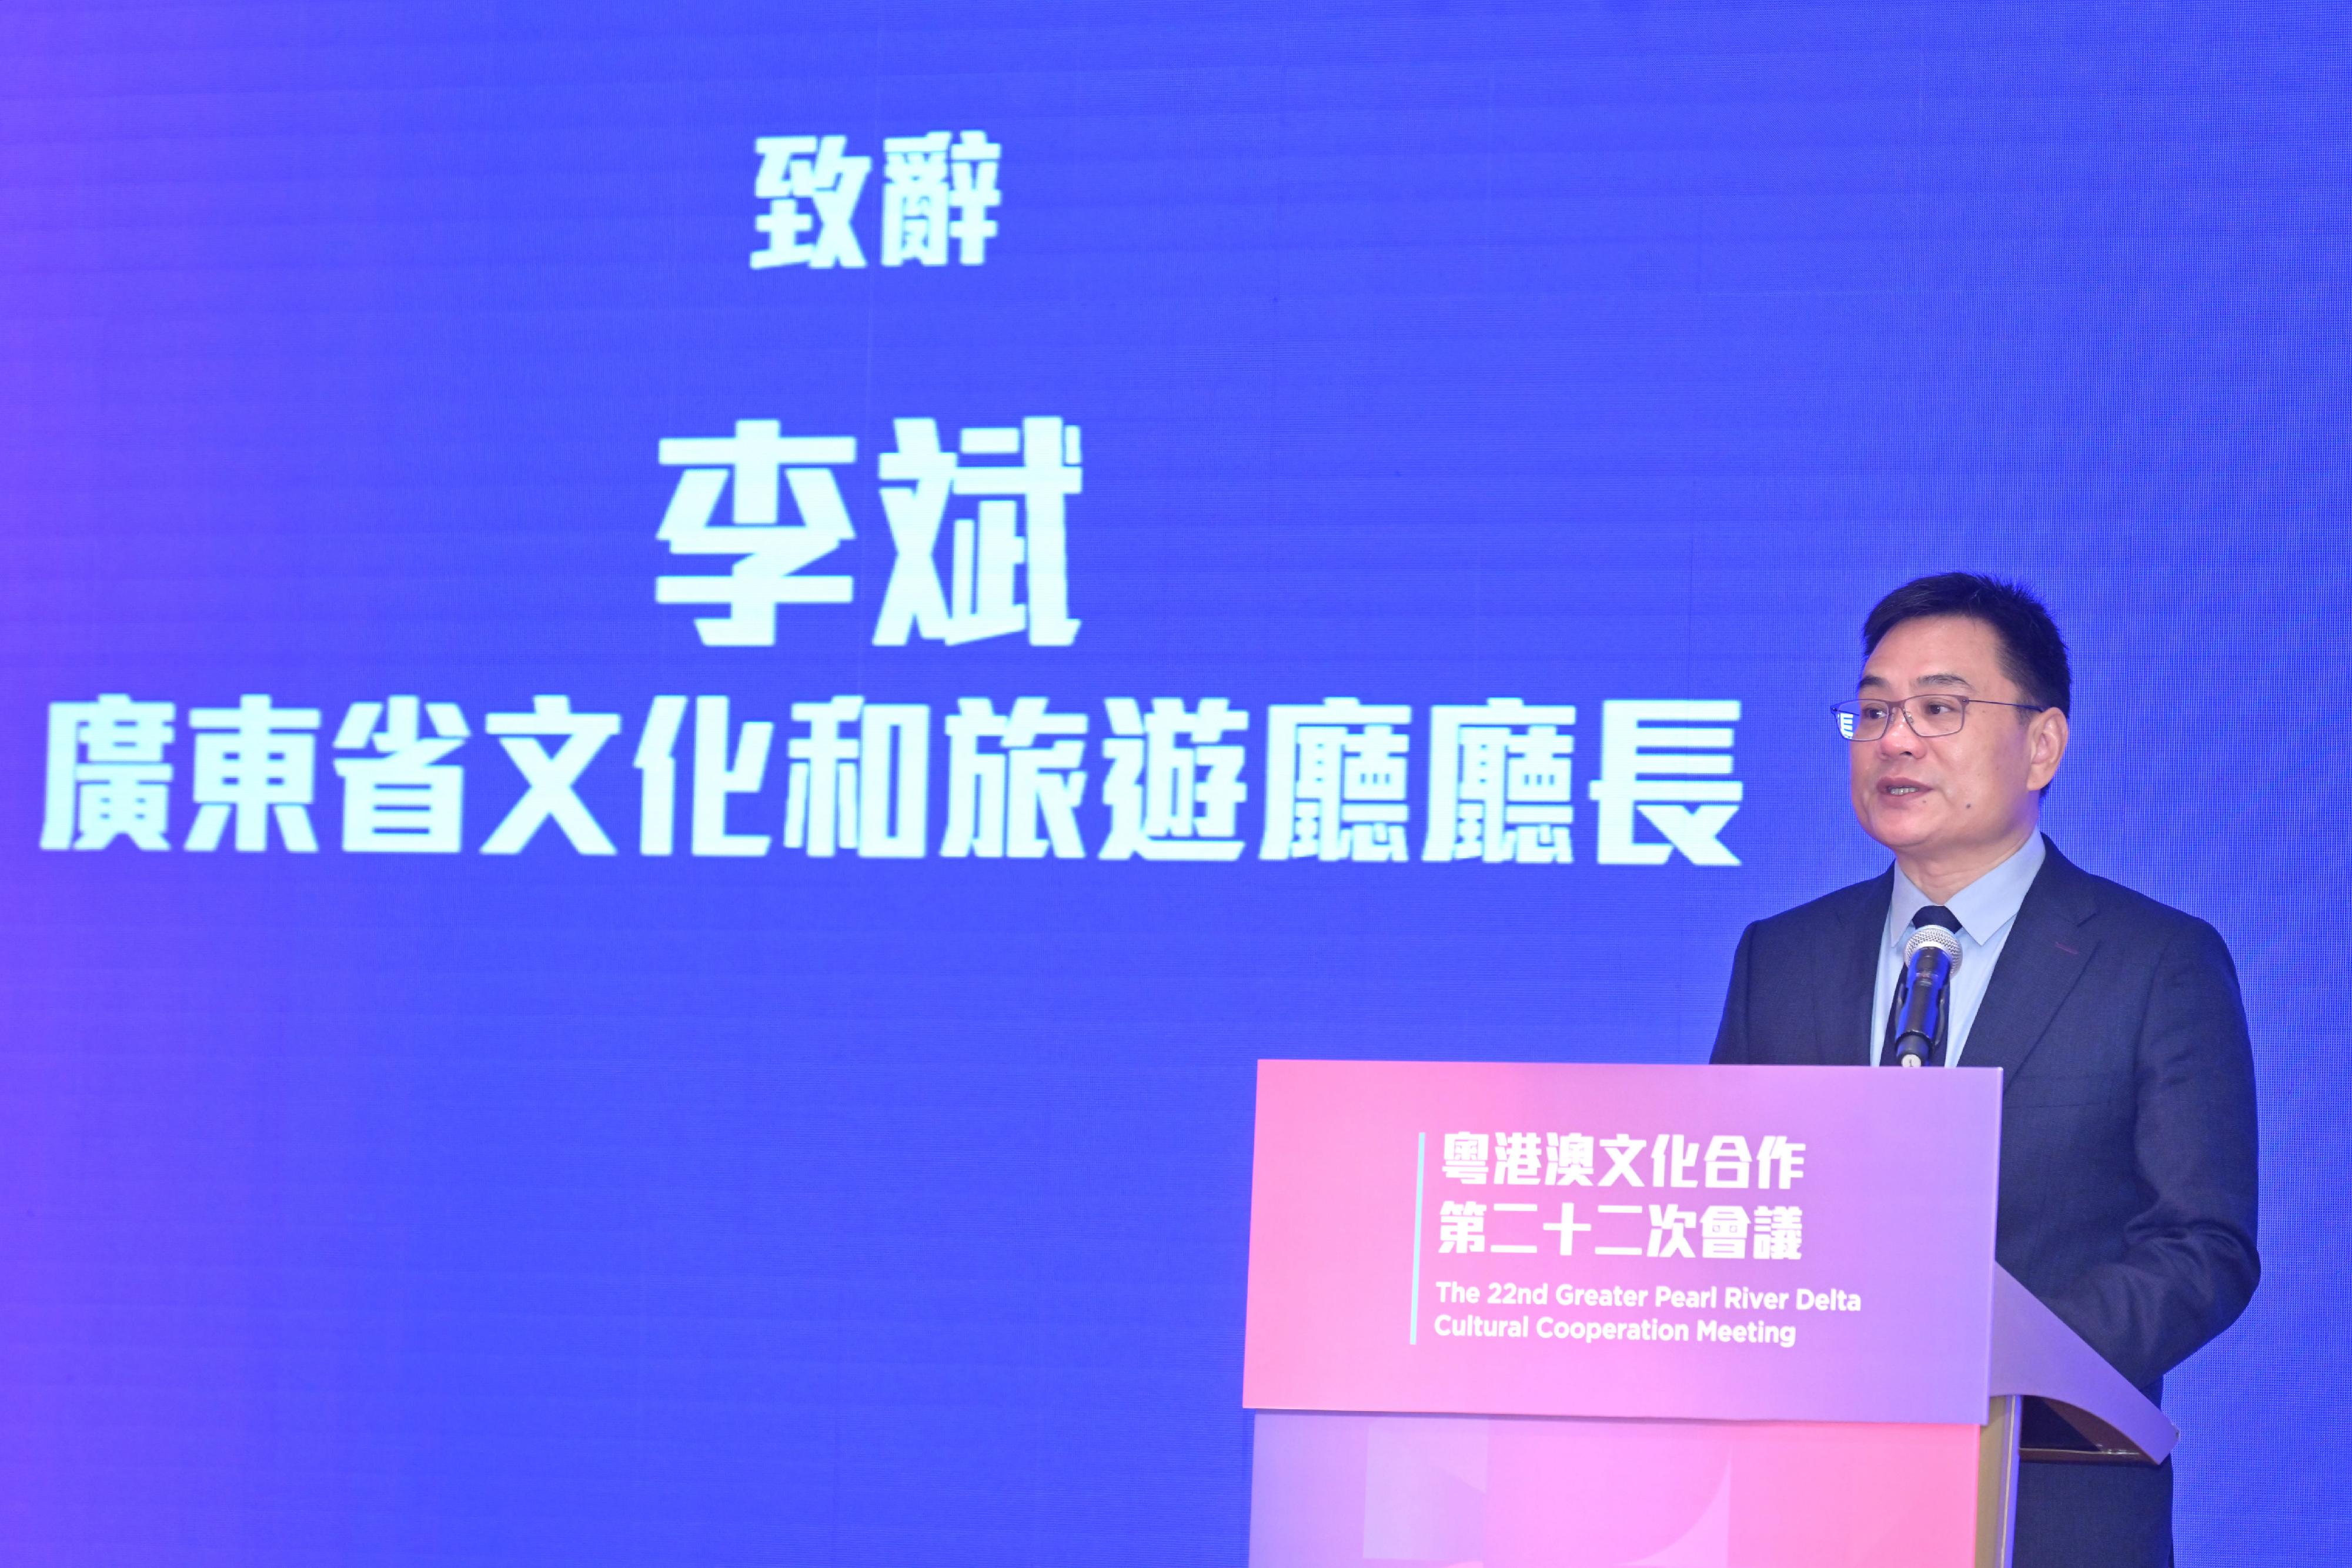 The 22nd Greater Pearl River Delta Cultural Cooperation Meeting (the Meeting), co-ordinated by the Culture, Sports and Tourism Bureau, was concluded in Hong Kong today (June 6). Photo shows the Director General of the Department of Culture and Tourism of Guangdong Province, Mr Li Bin, delivering a speech at the Meeting today.